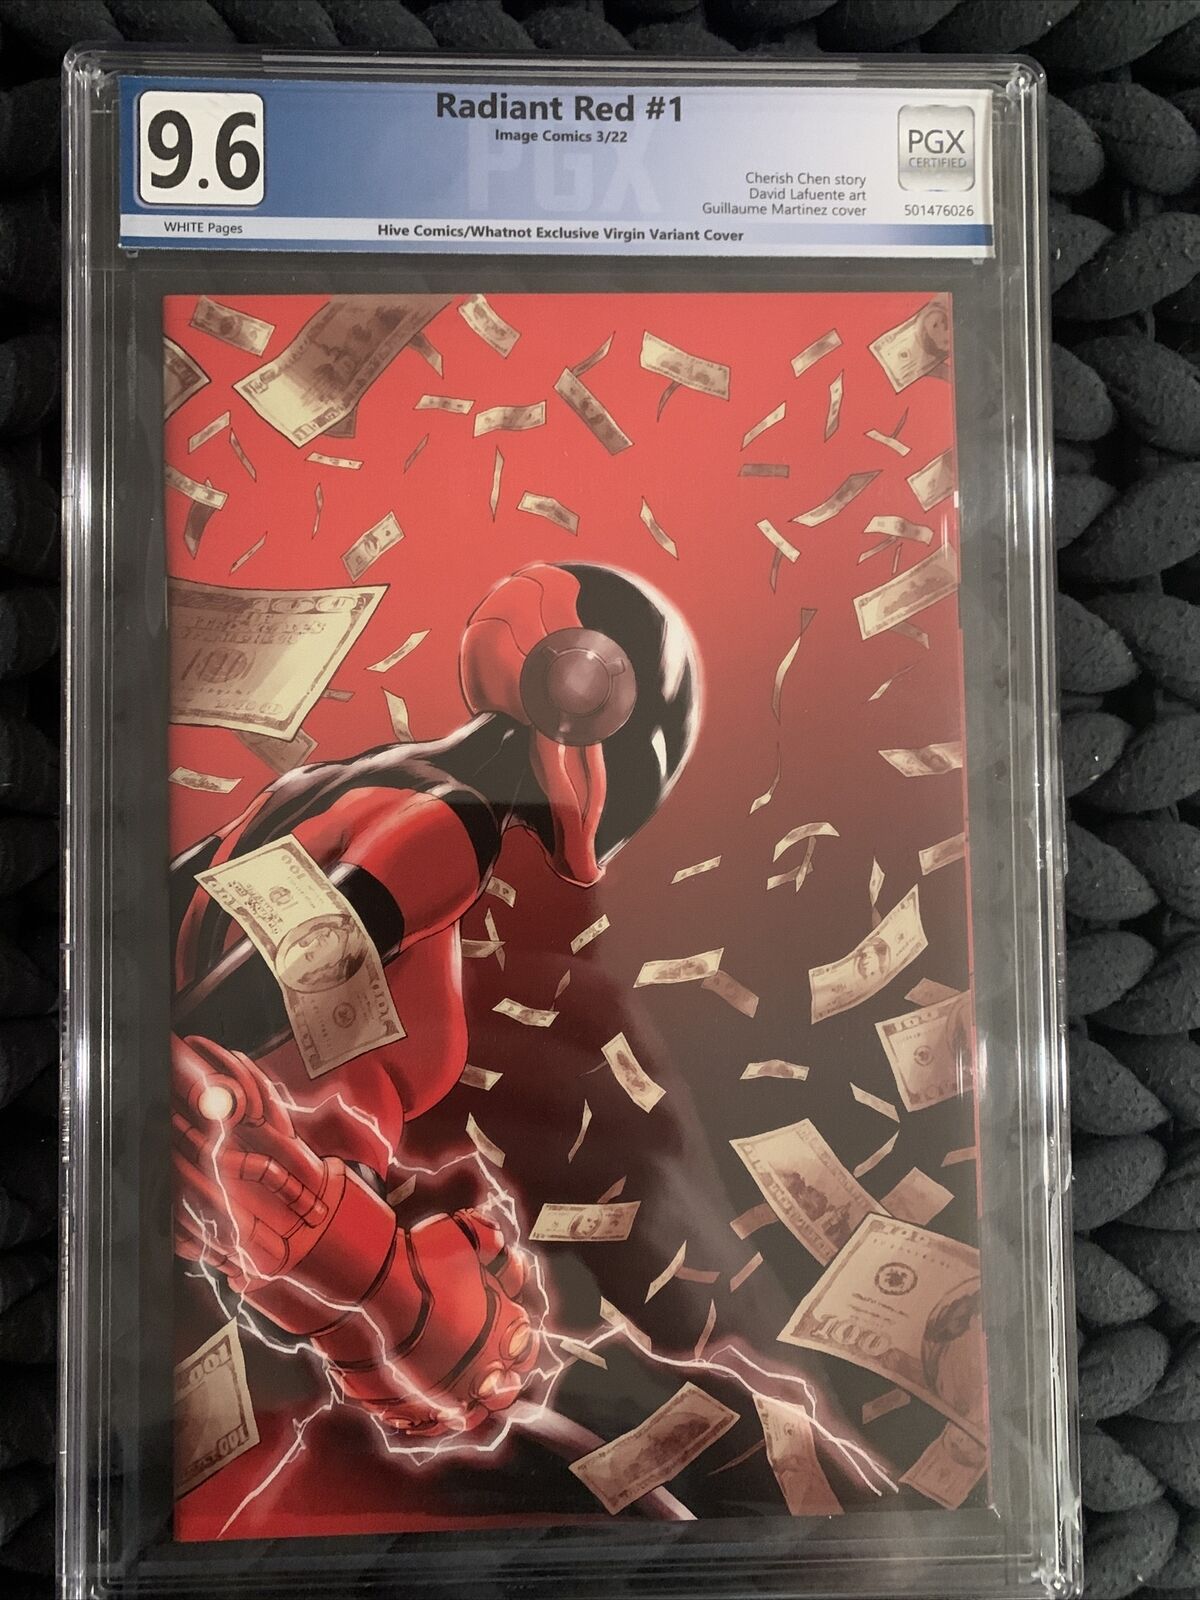 Radiant Red #1 PGX 9.6 Image Hive Comics/WhatNot Exclusive Virgin Variant Cover